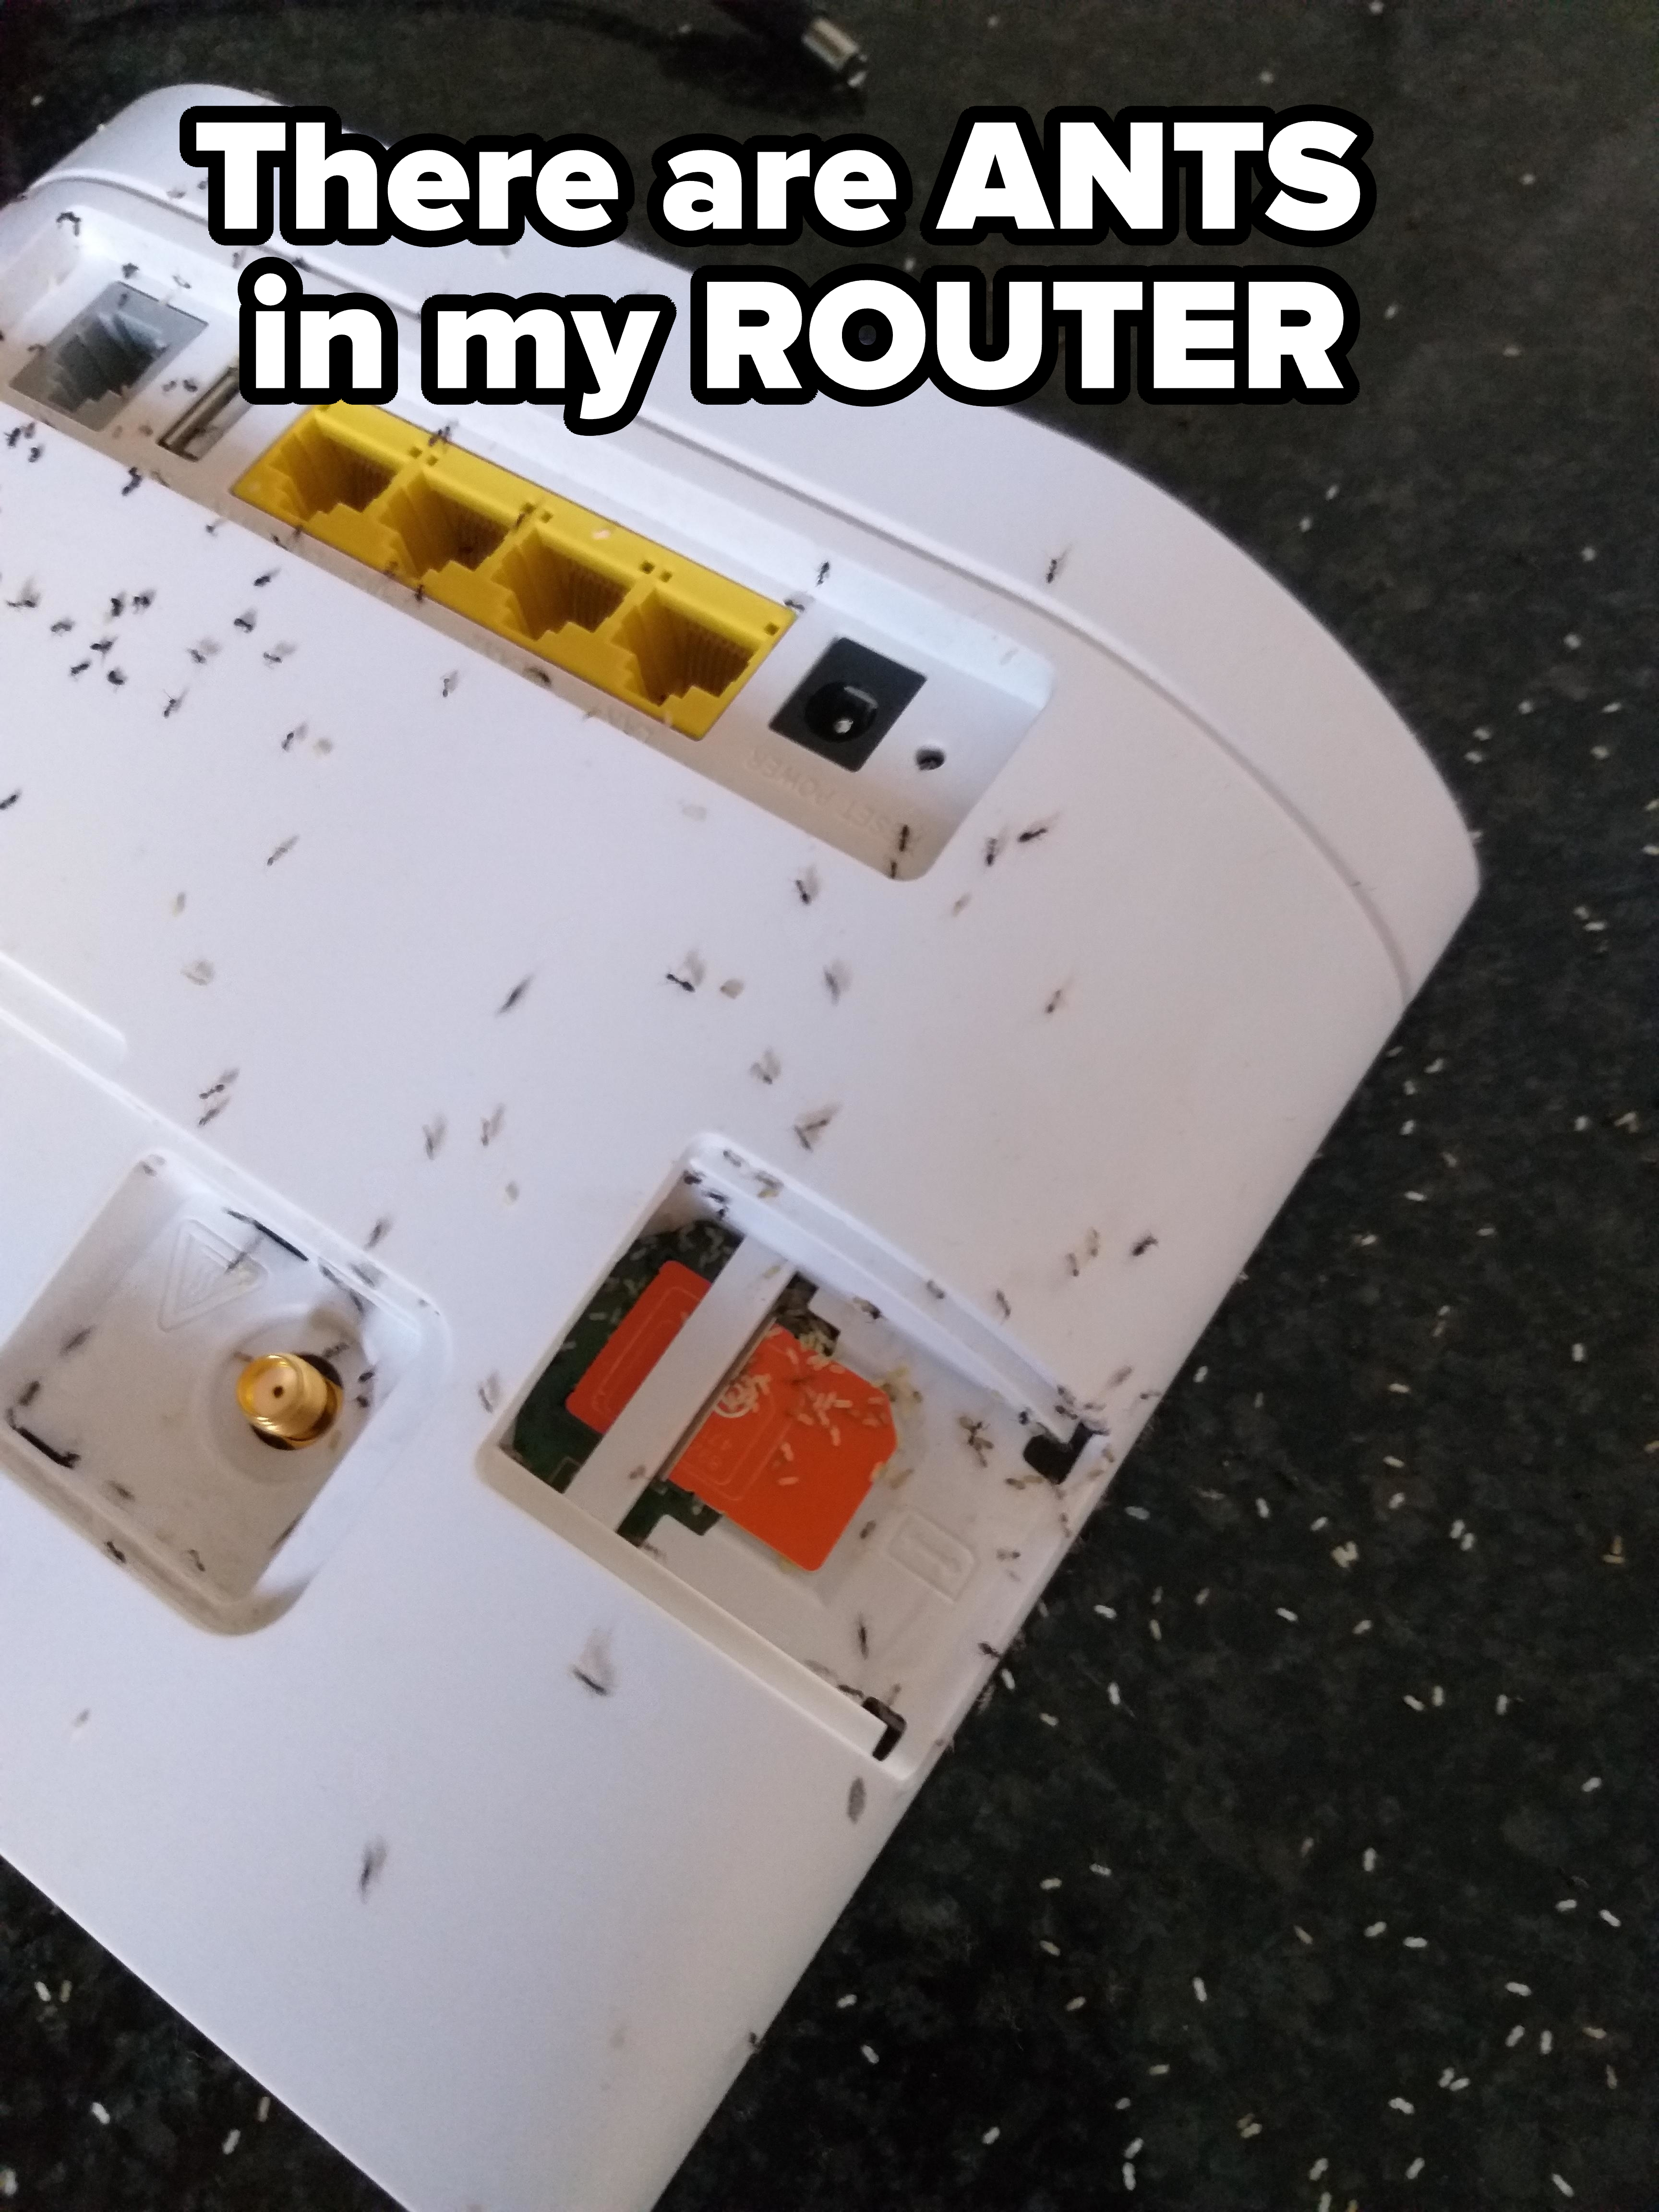 &quot;There are ANTS in my ROUTER,&quot; showing a router with tiny ants all over it